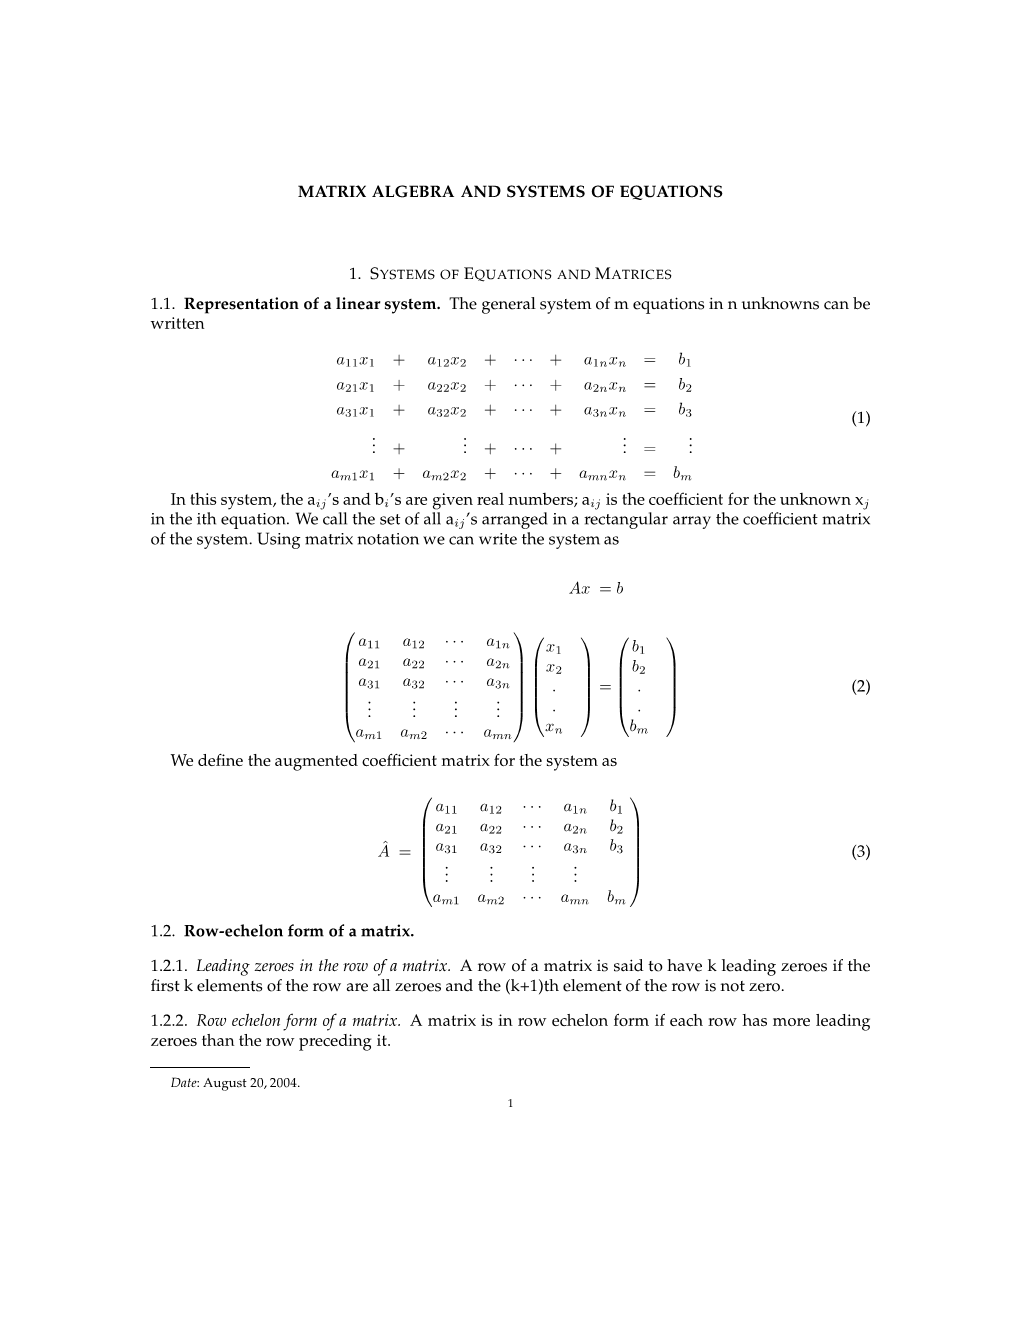 Matrix Algebra and Systems of Equations